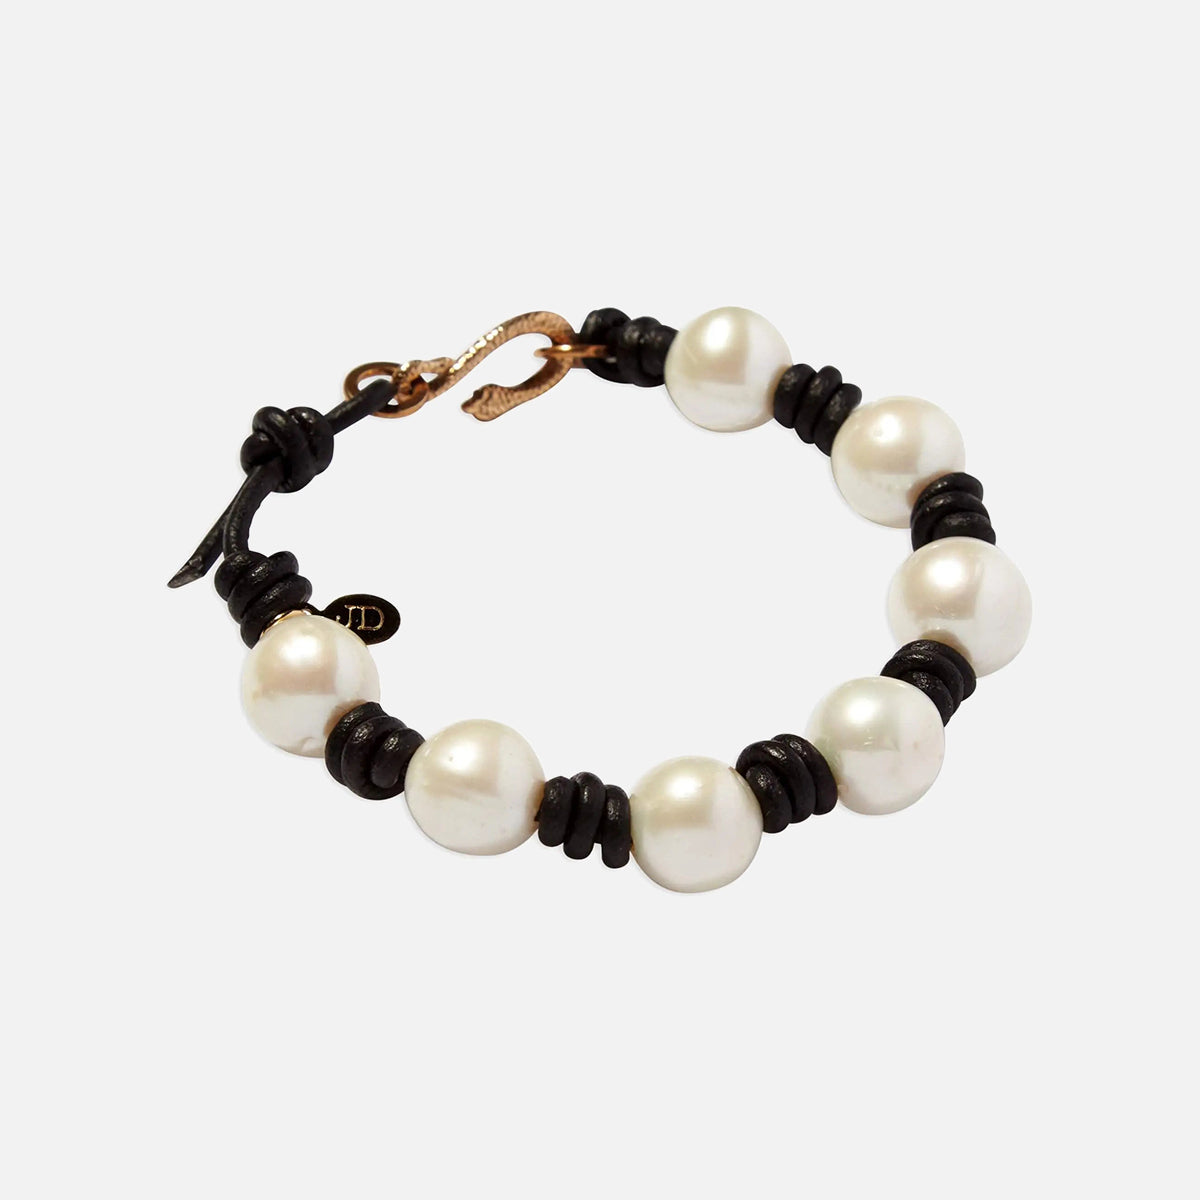 Knotted Pearl and Leather Snake Bracelet